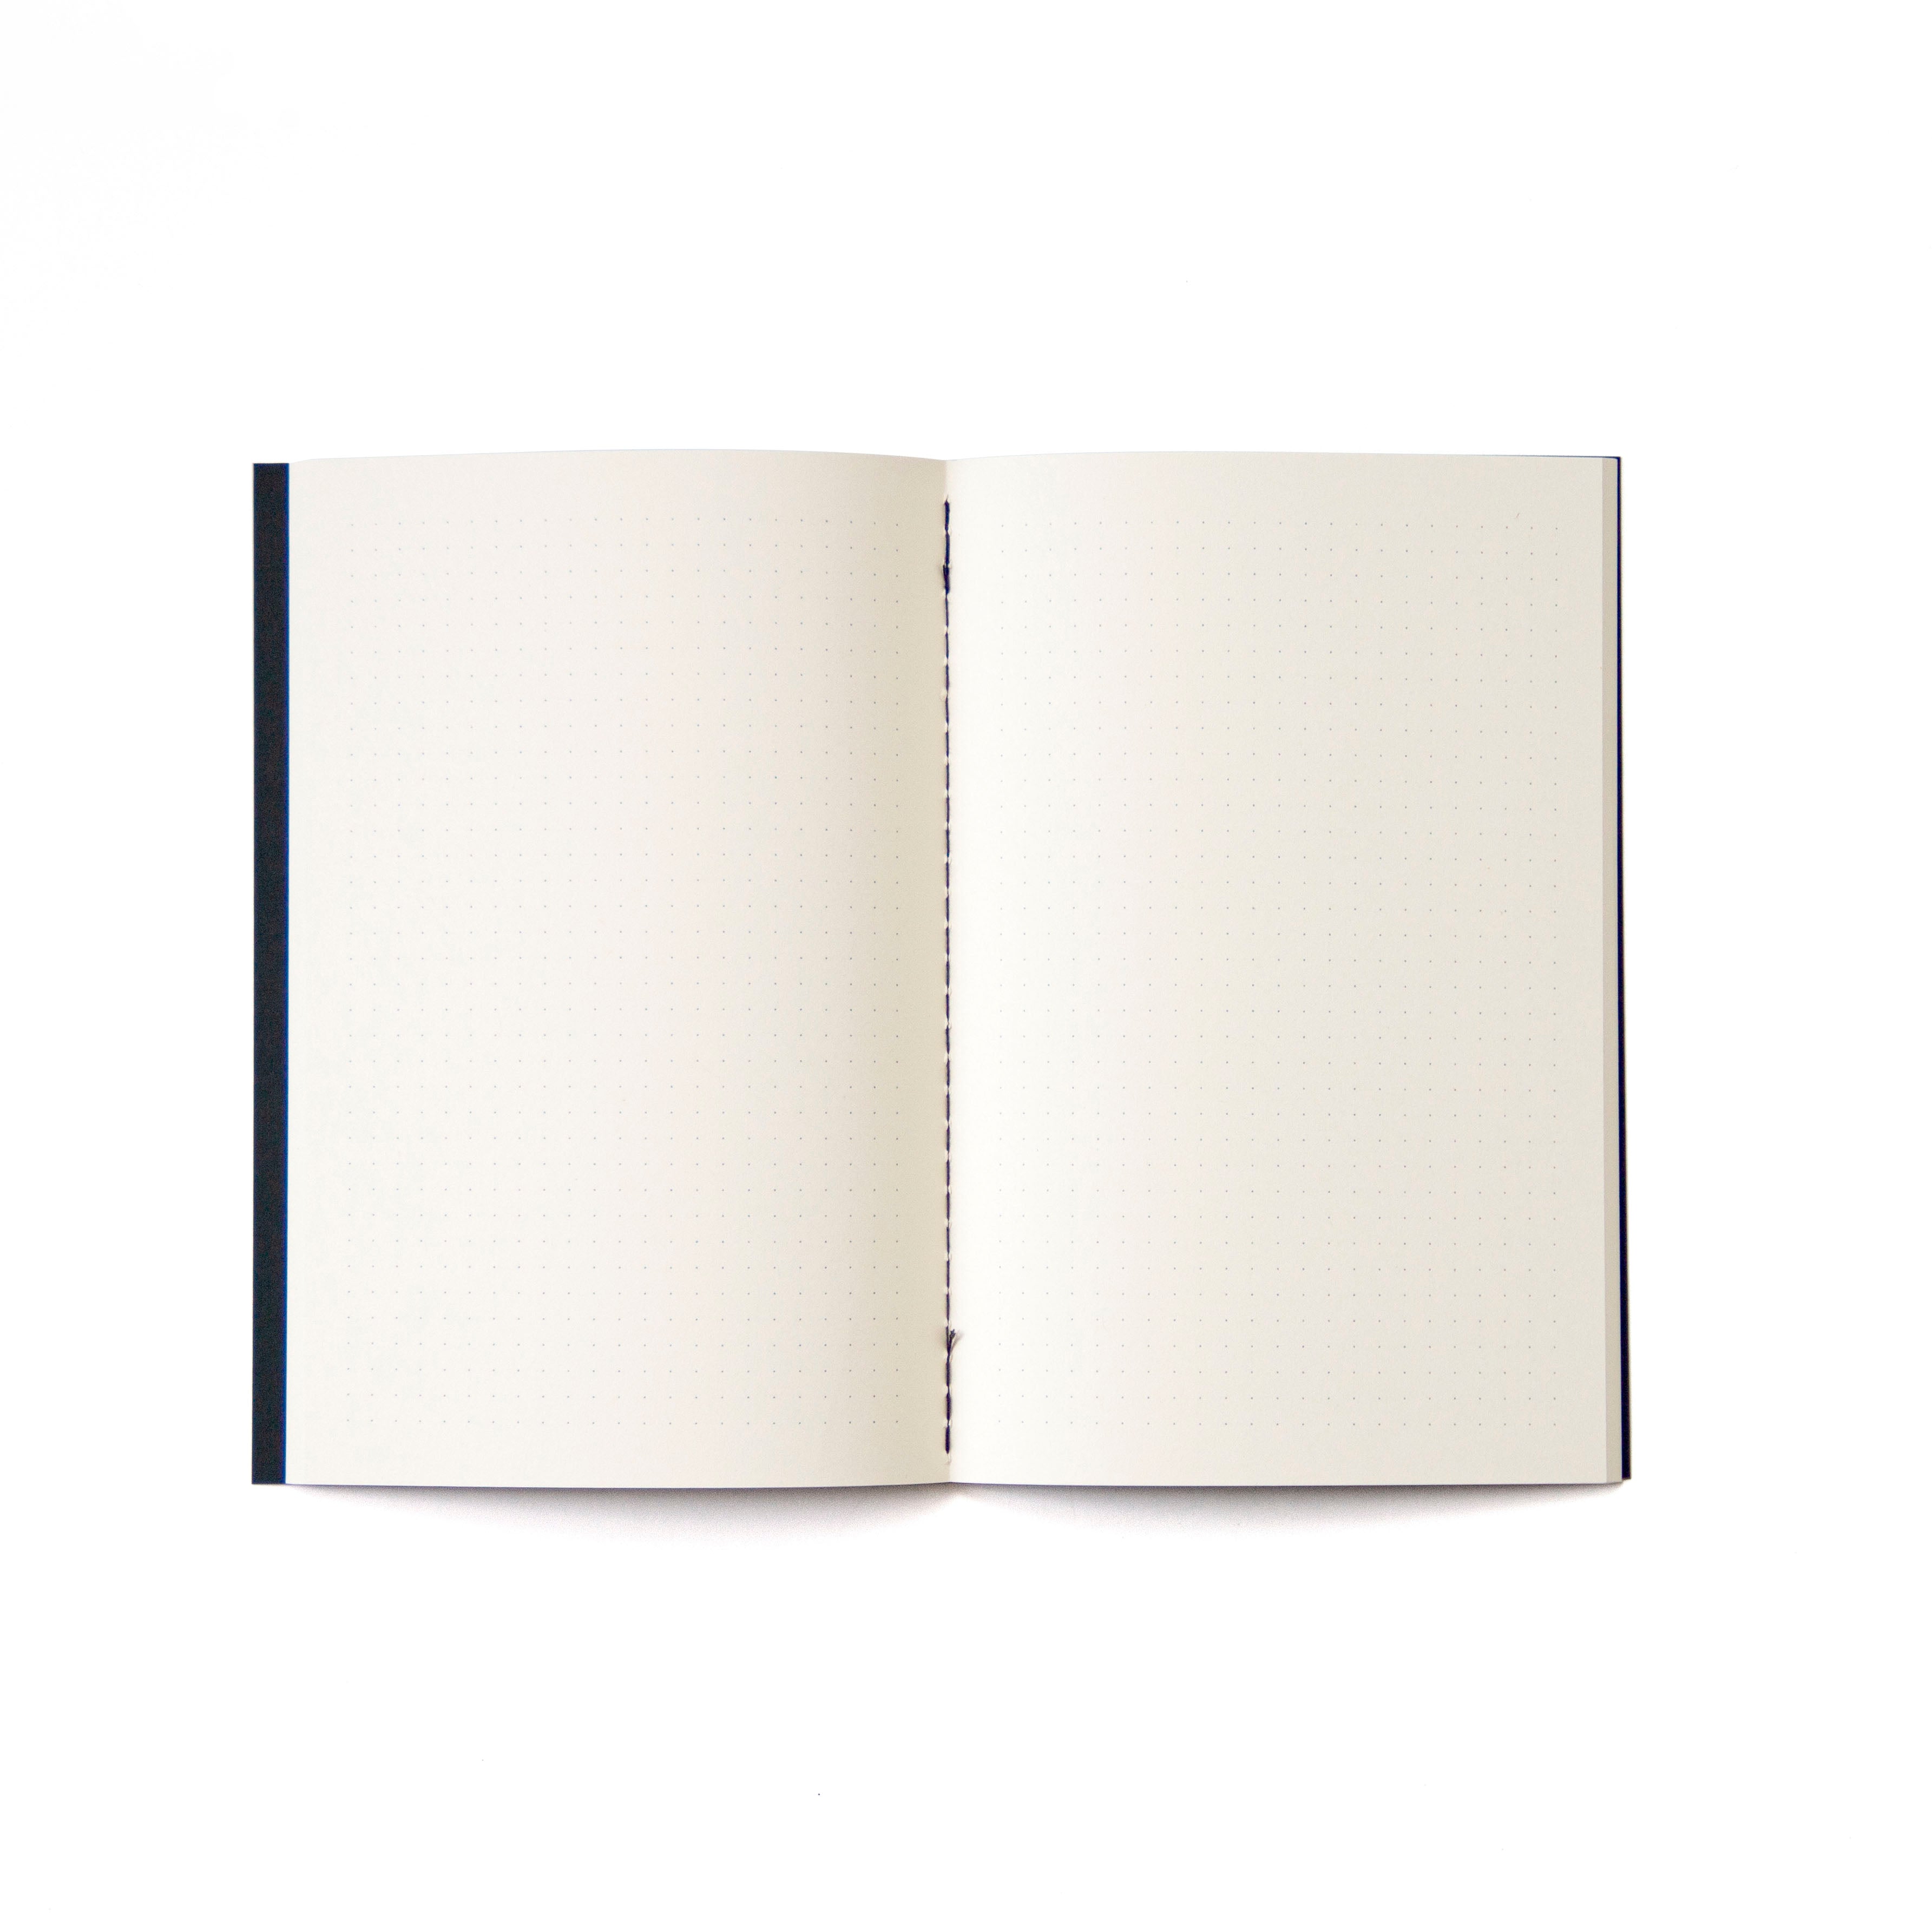 Open "Epic stuff" dotted notebook. Binding with black thread.